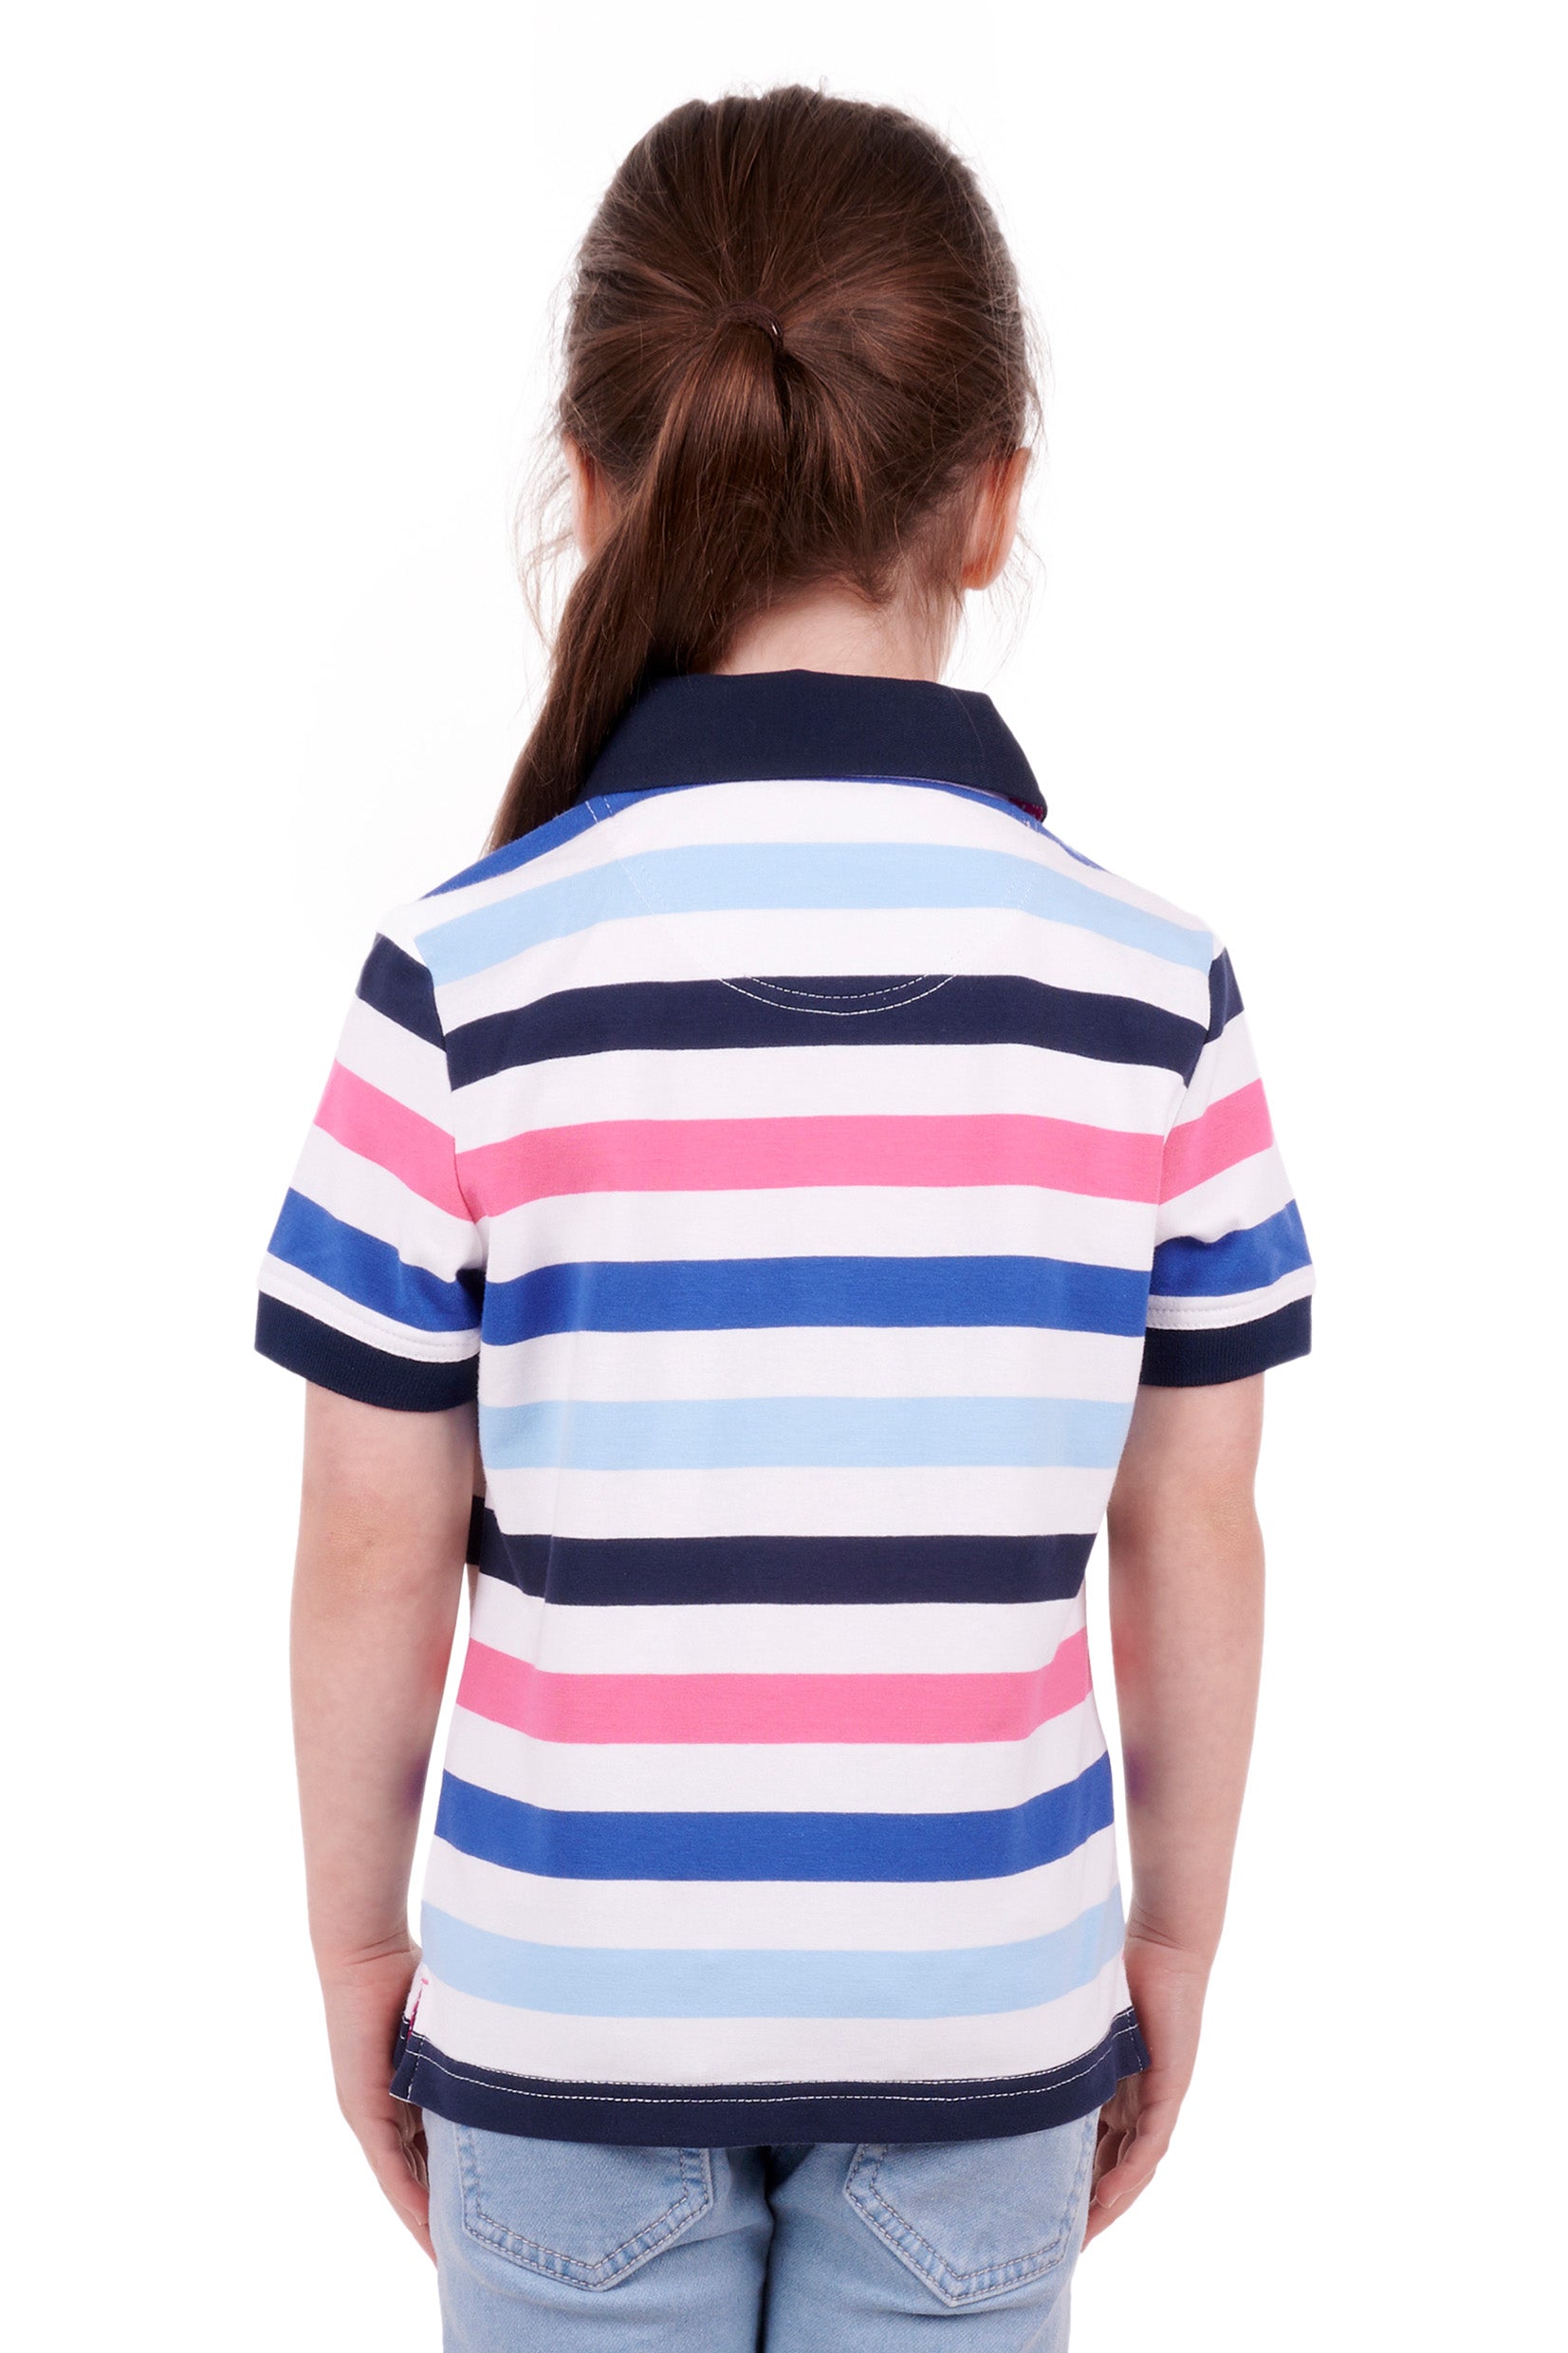 Thomas Cook Girls Andy Short Sleeve Polo